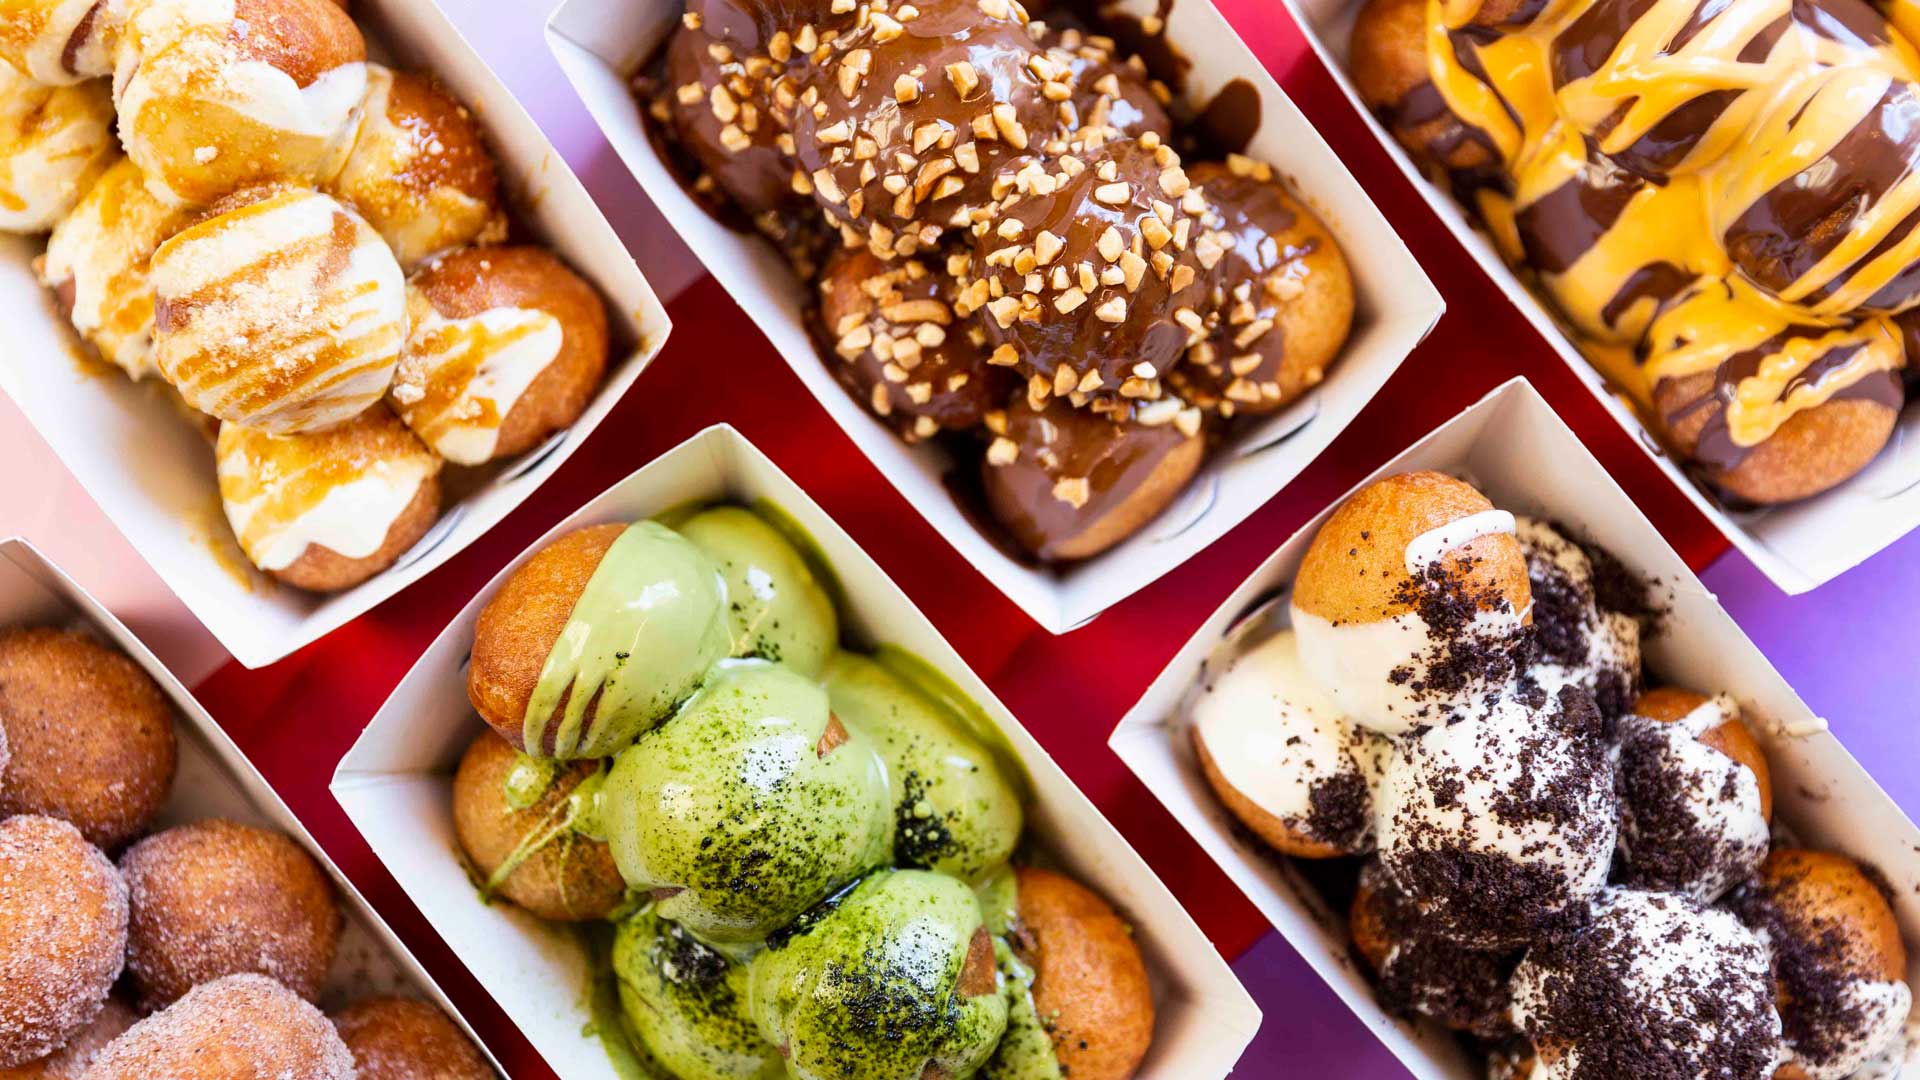 A New Store Dedicated Entirely to Greek Doughnuts Is Opening in Sydney